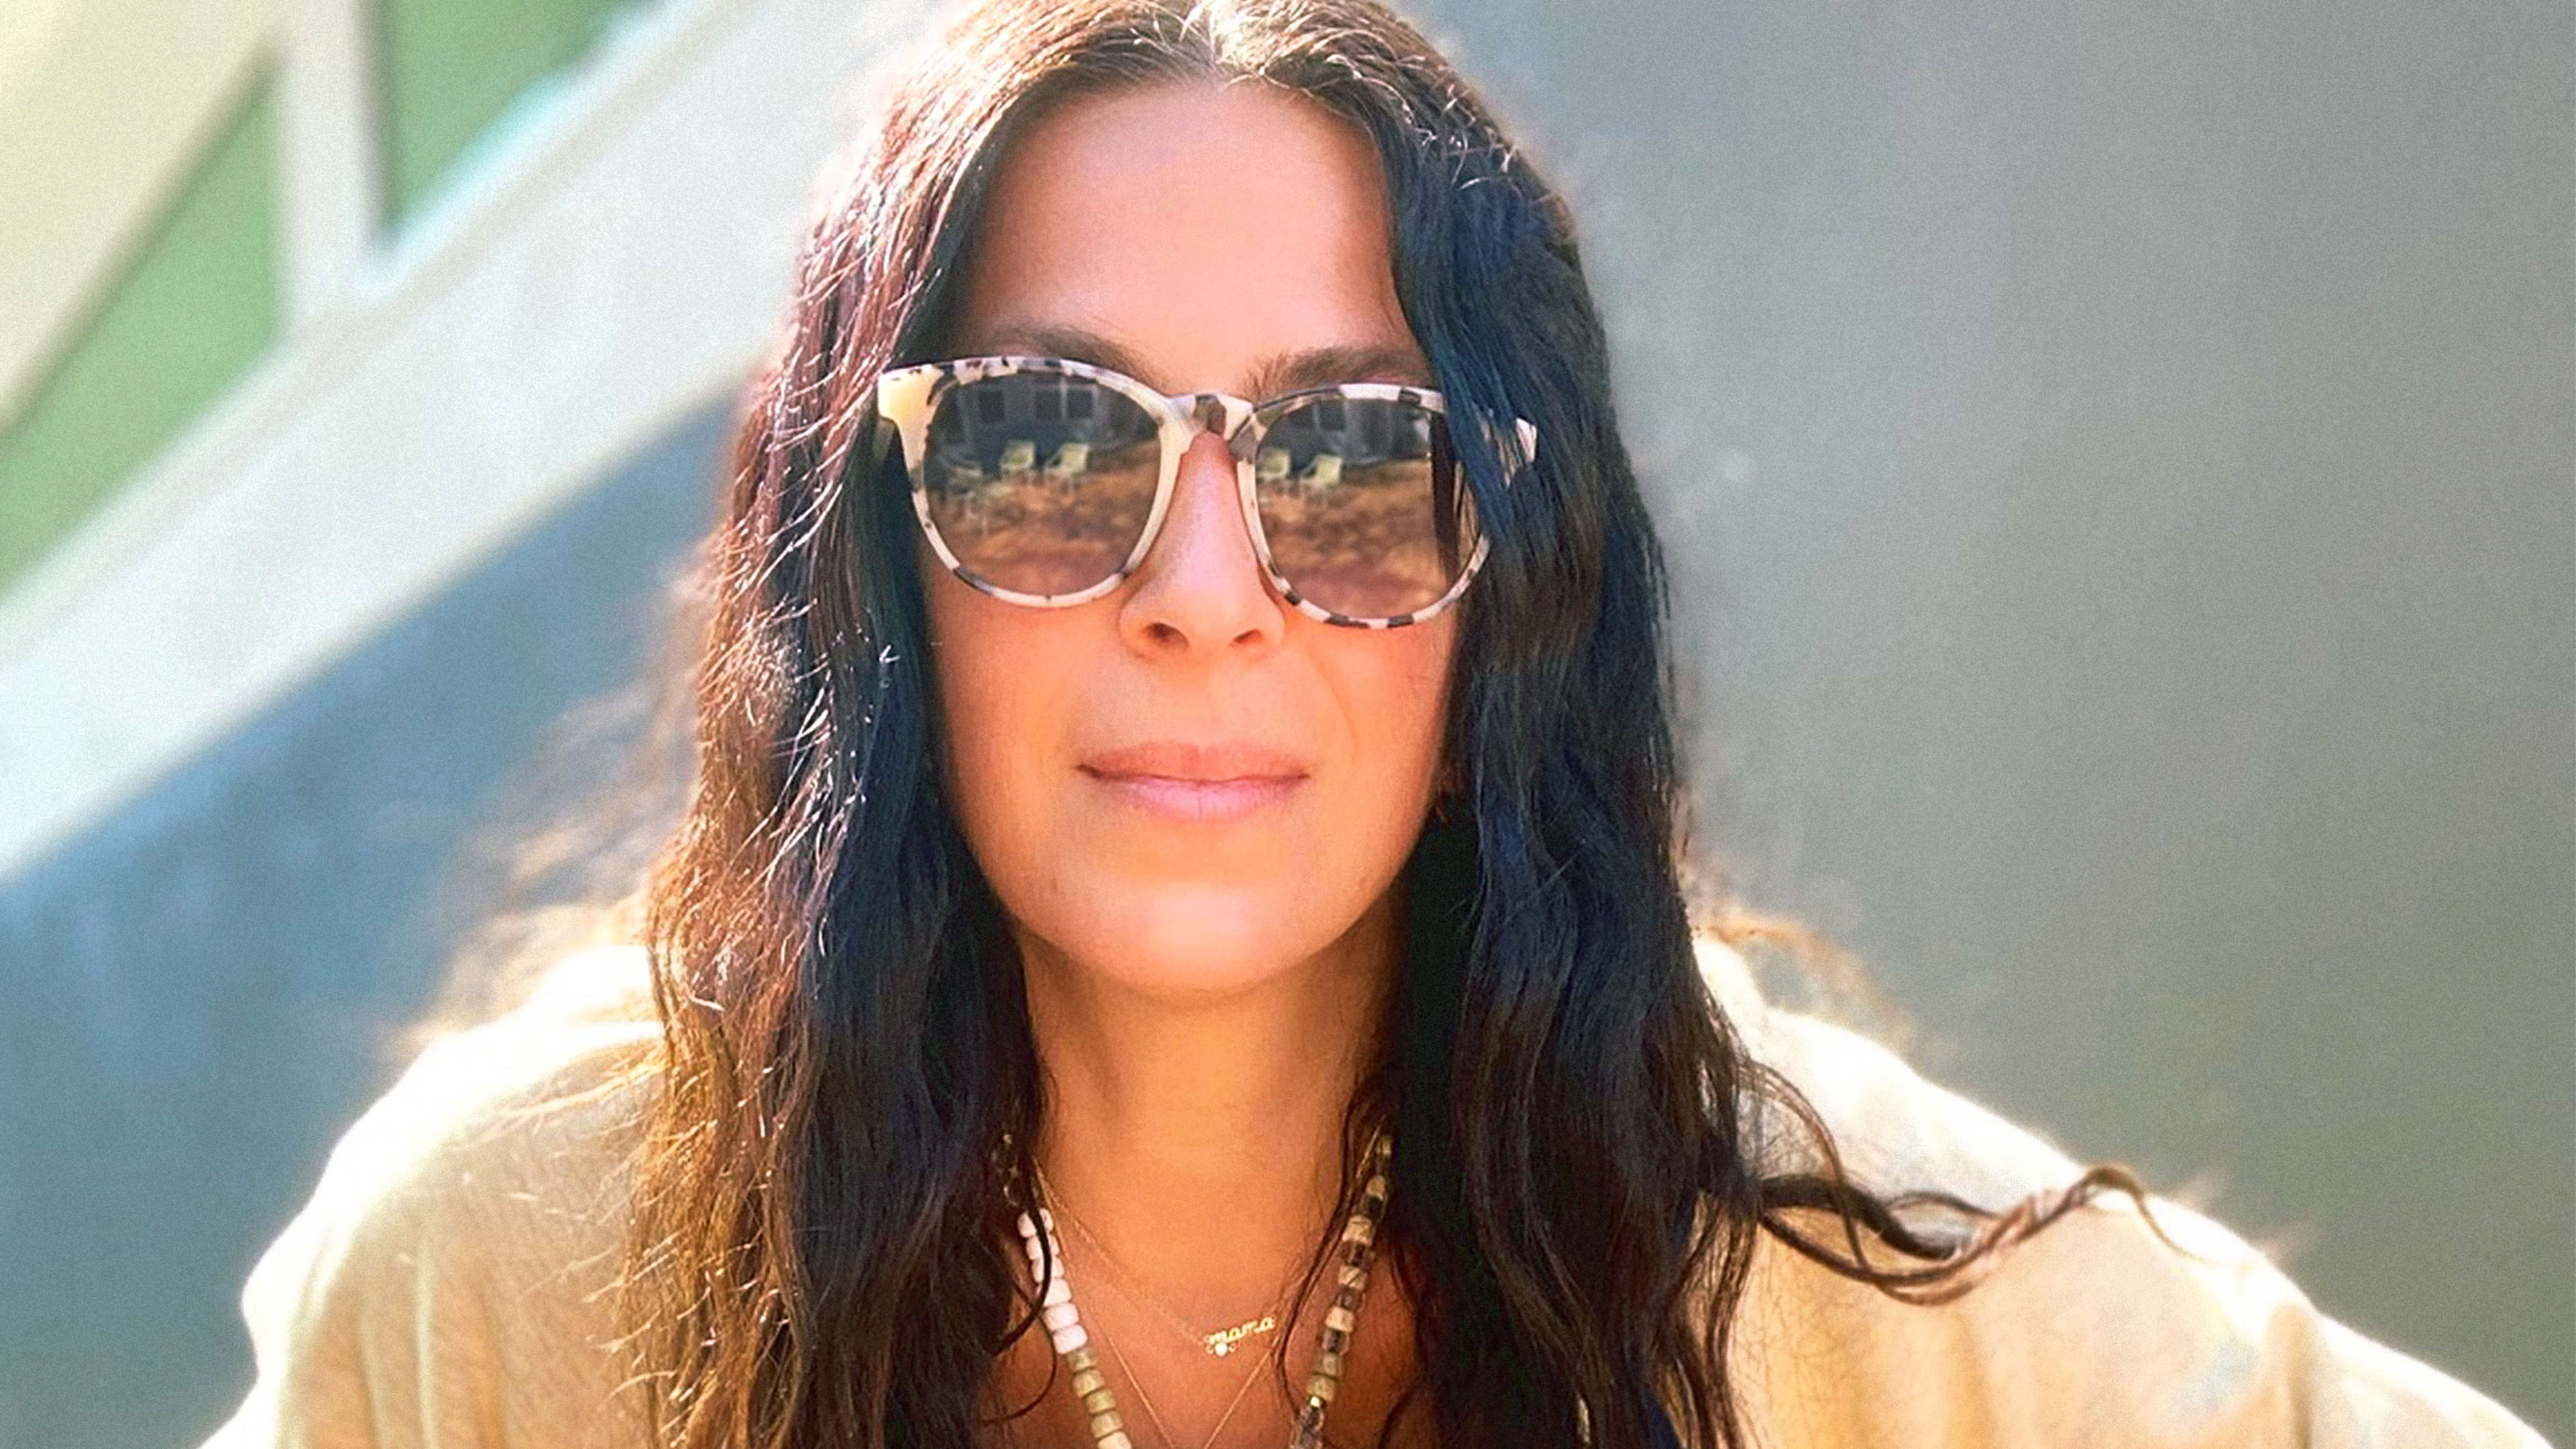 The untold story of the ripped T-shirt that made Rebecca Minkoff famous